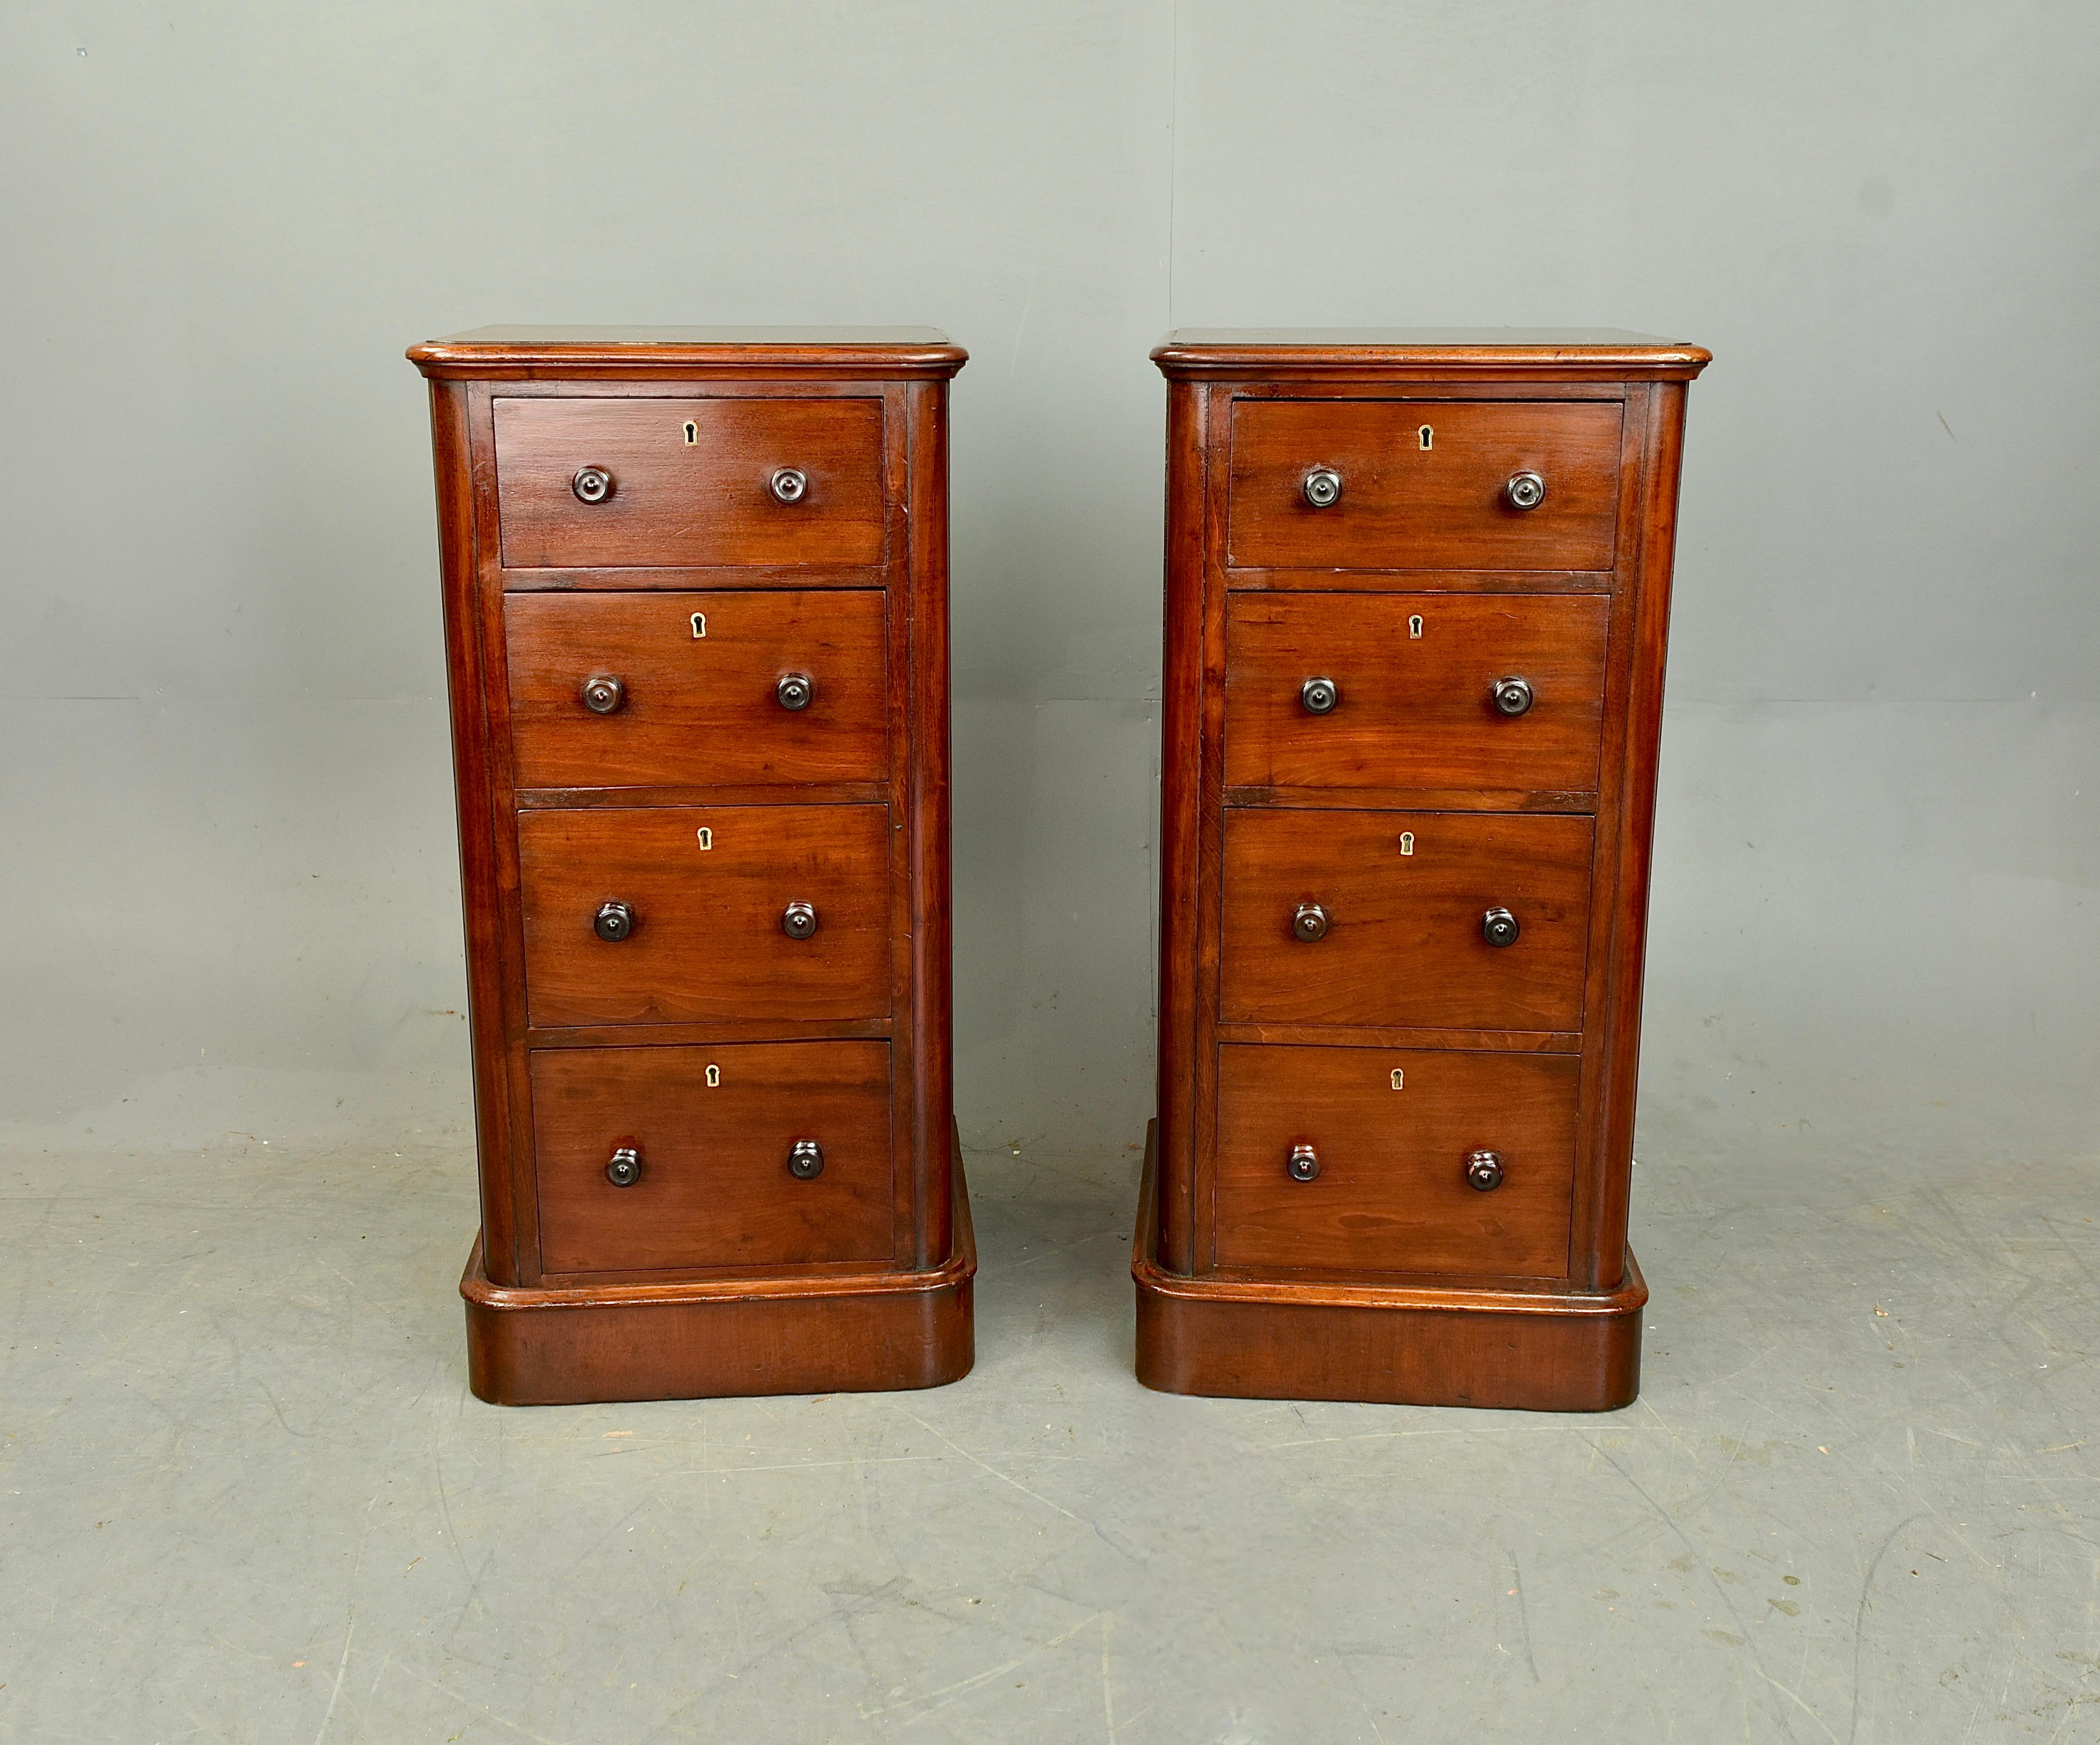 Fine quality pair of mid Victorian mahogany bedside chests .
Each chest has four graduating mahogany lined hand dovetailed drawers ,that slide nice and smooth as they should and come complete with a key for the top drawer locks .and retain their